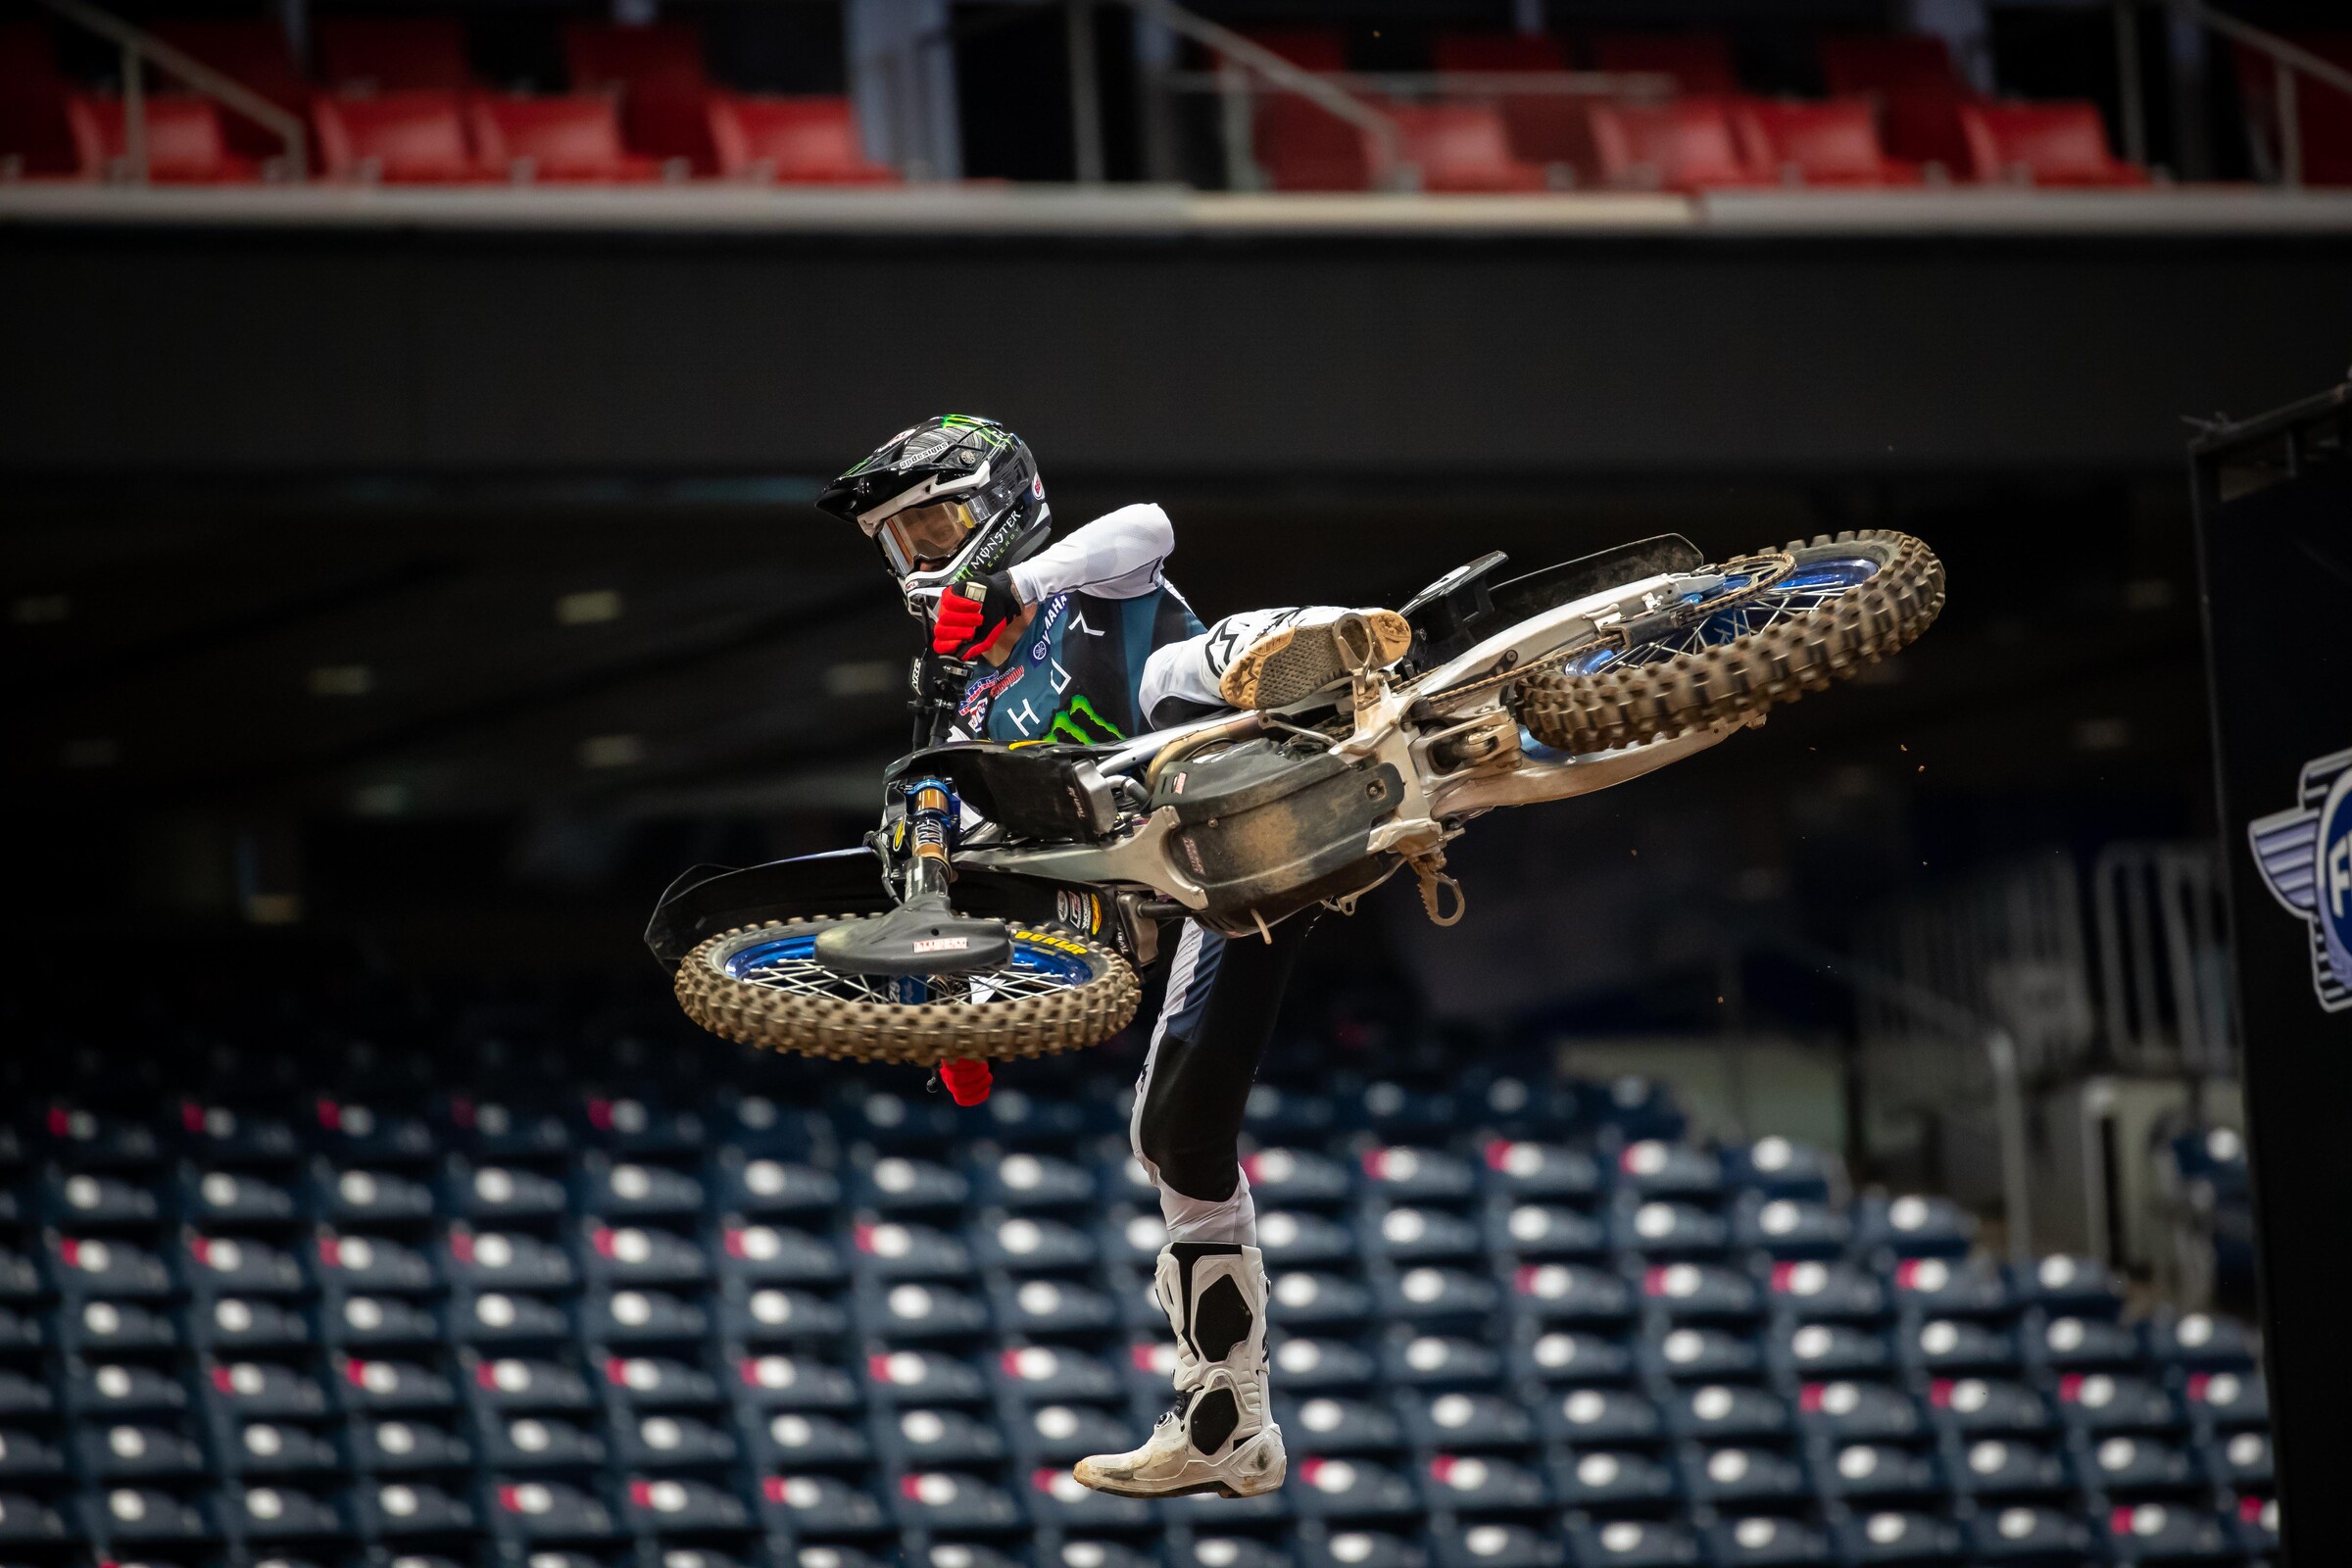 Christian Craig on First Supercross Win in Five Years Racer X